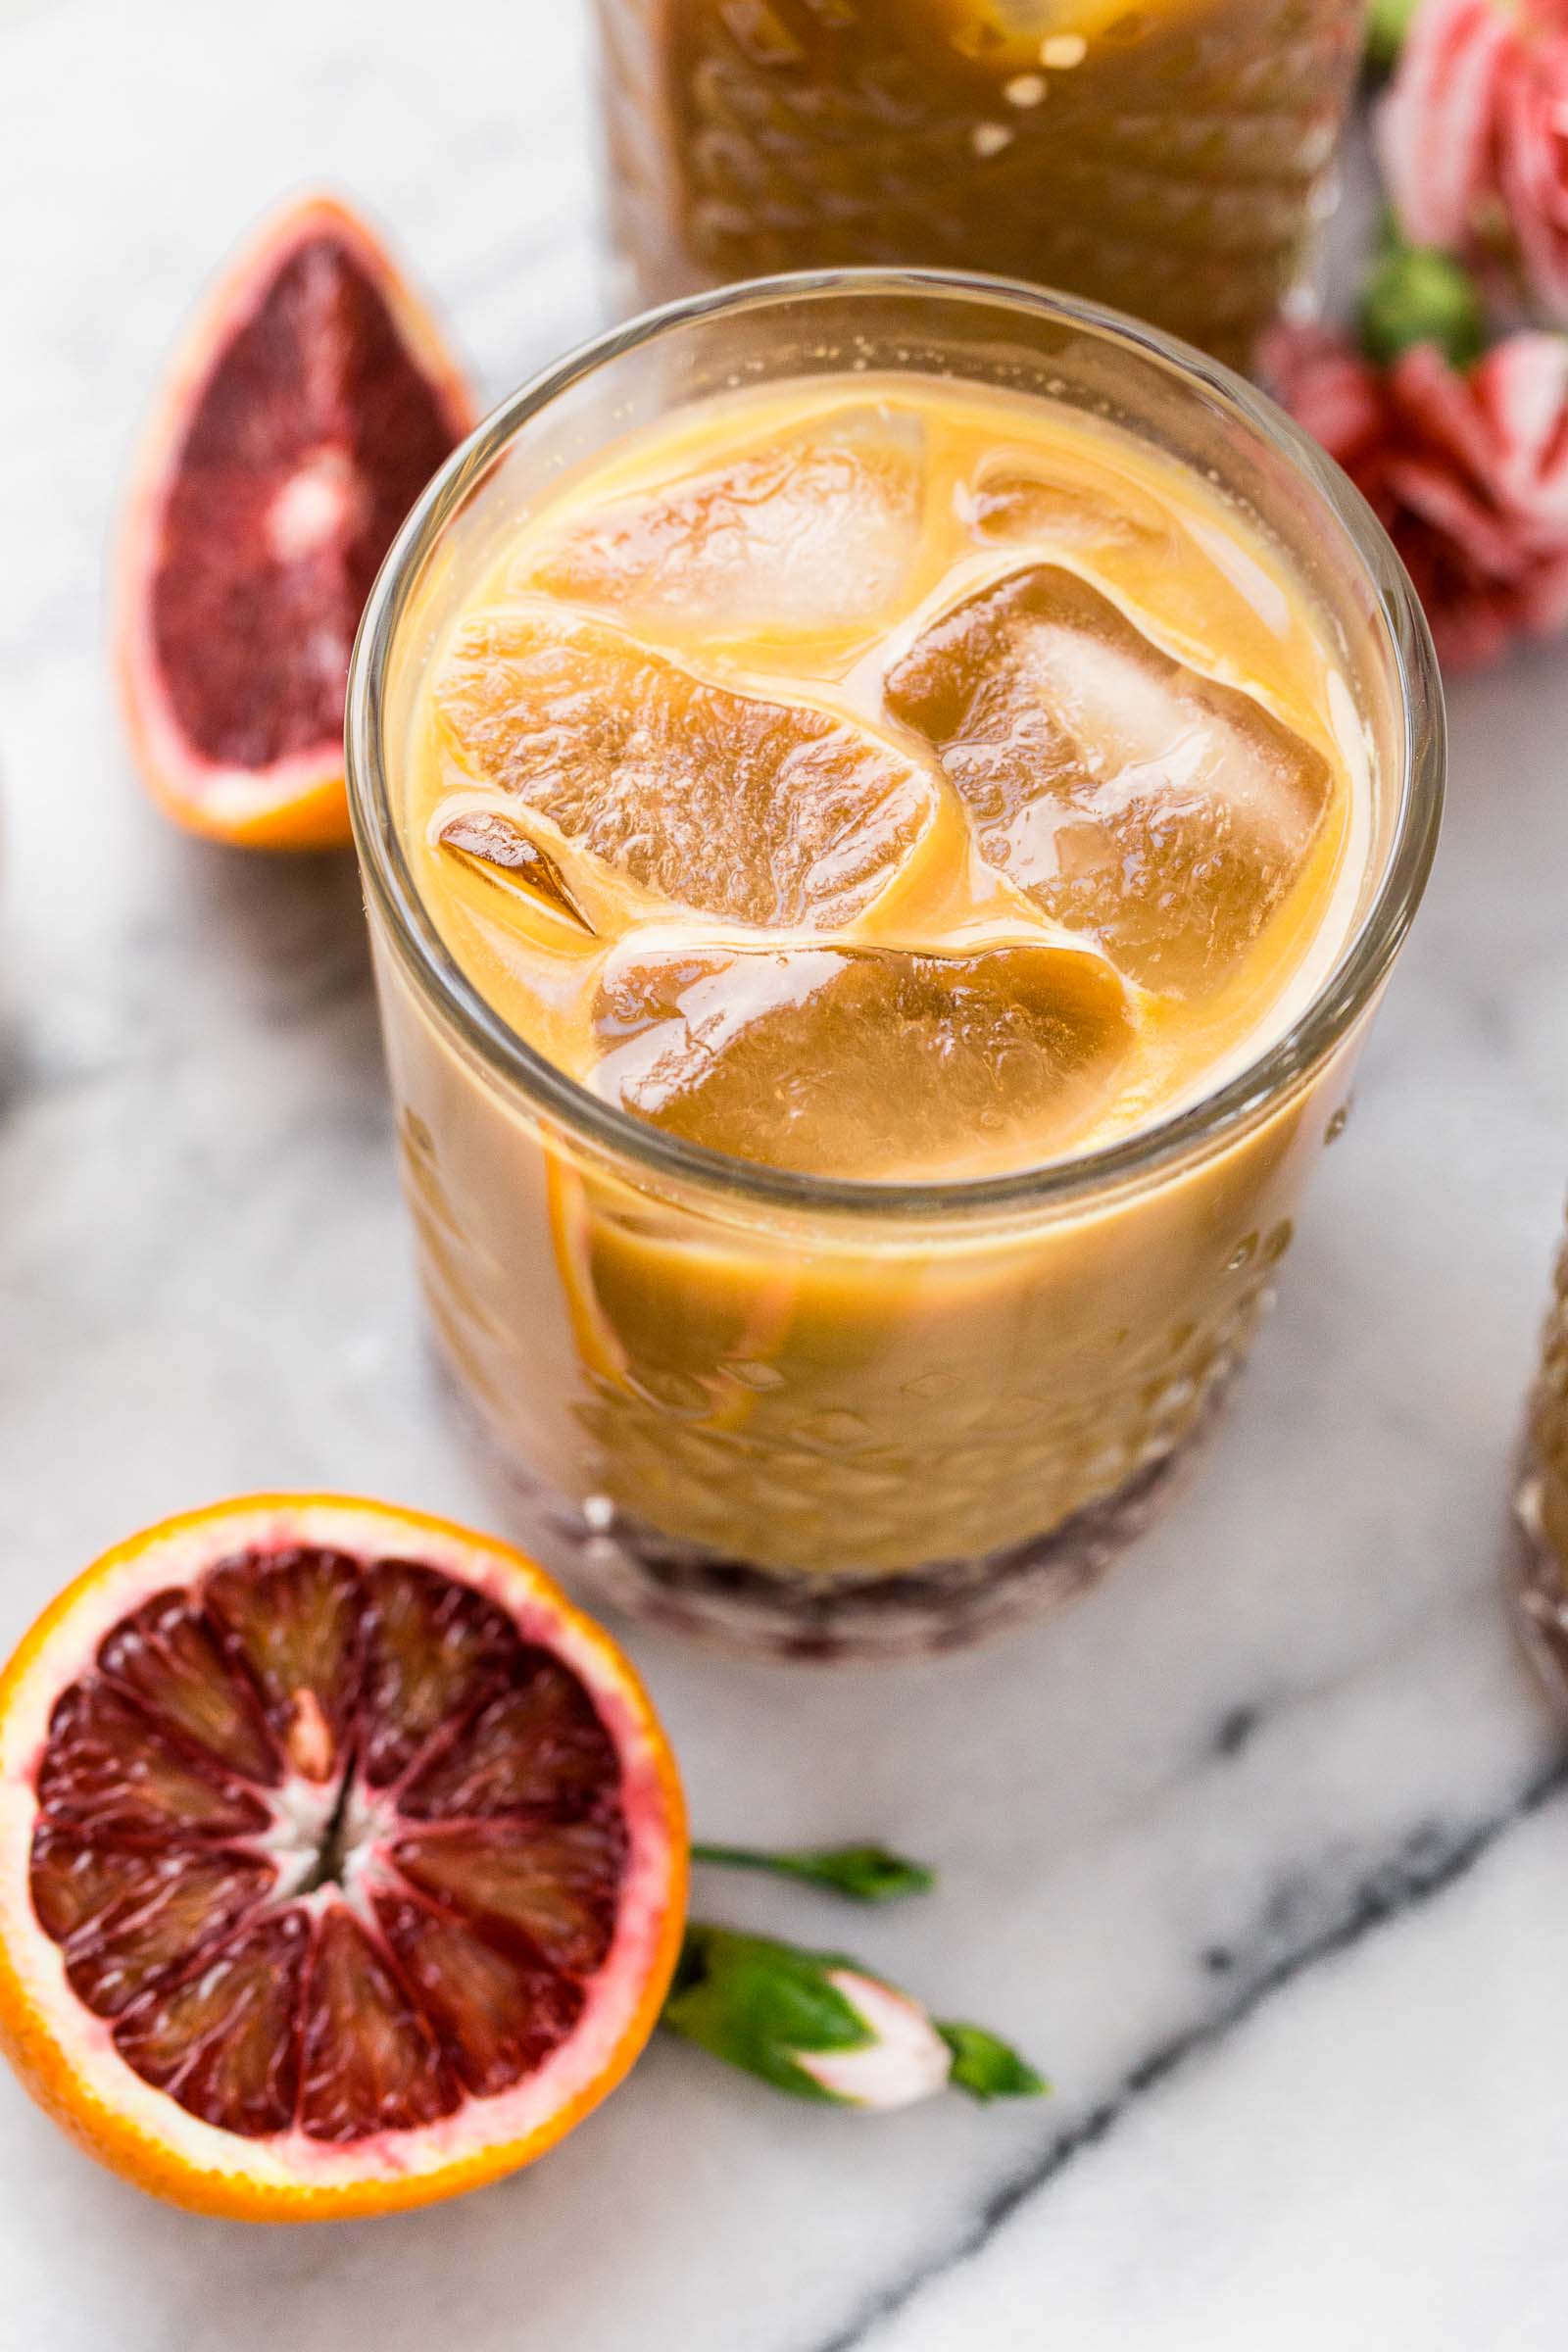 also known as what happens when you spike cold brew coffee with the perfectly not-too-sweet blood orange syrup, blood orange cold brew iced coffee will be your newest winter citrus obsession! #bloodorange #coldbrew #coldbrewcoffee #coldbrewcoffeerecipe #icedcoffee #wintercitrus #playswellwithbutter